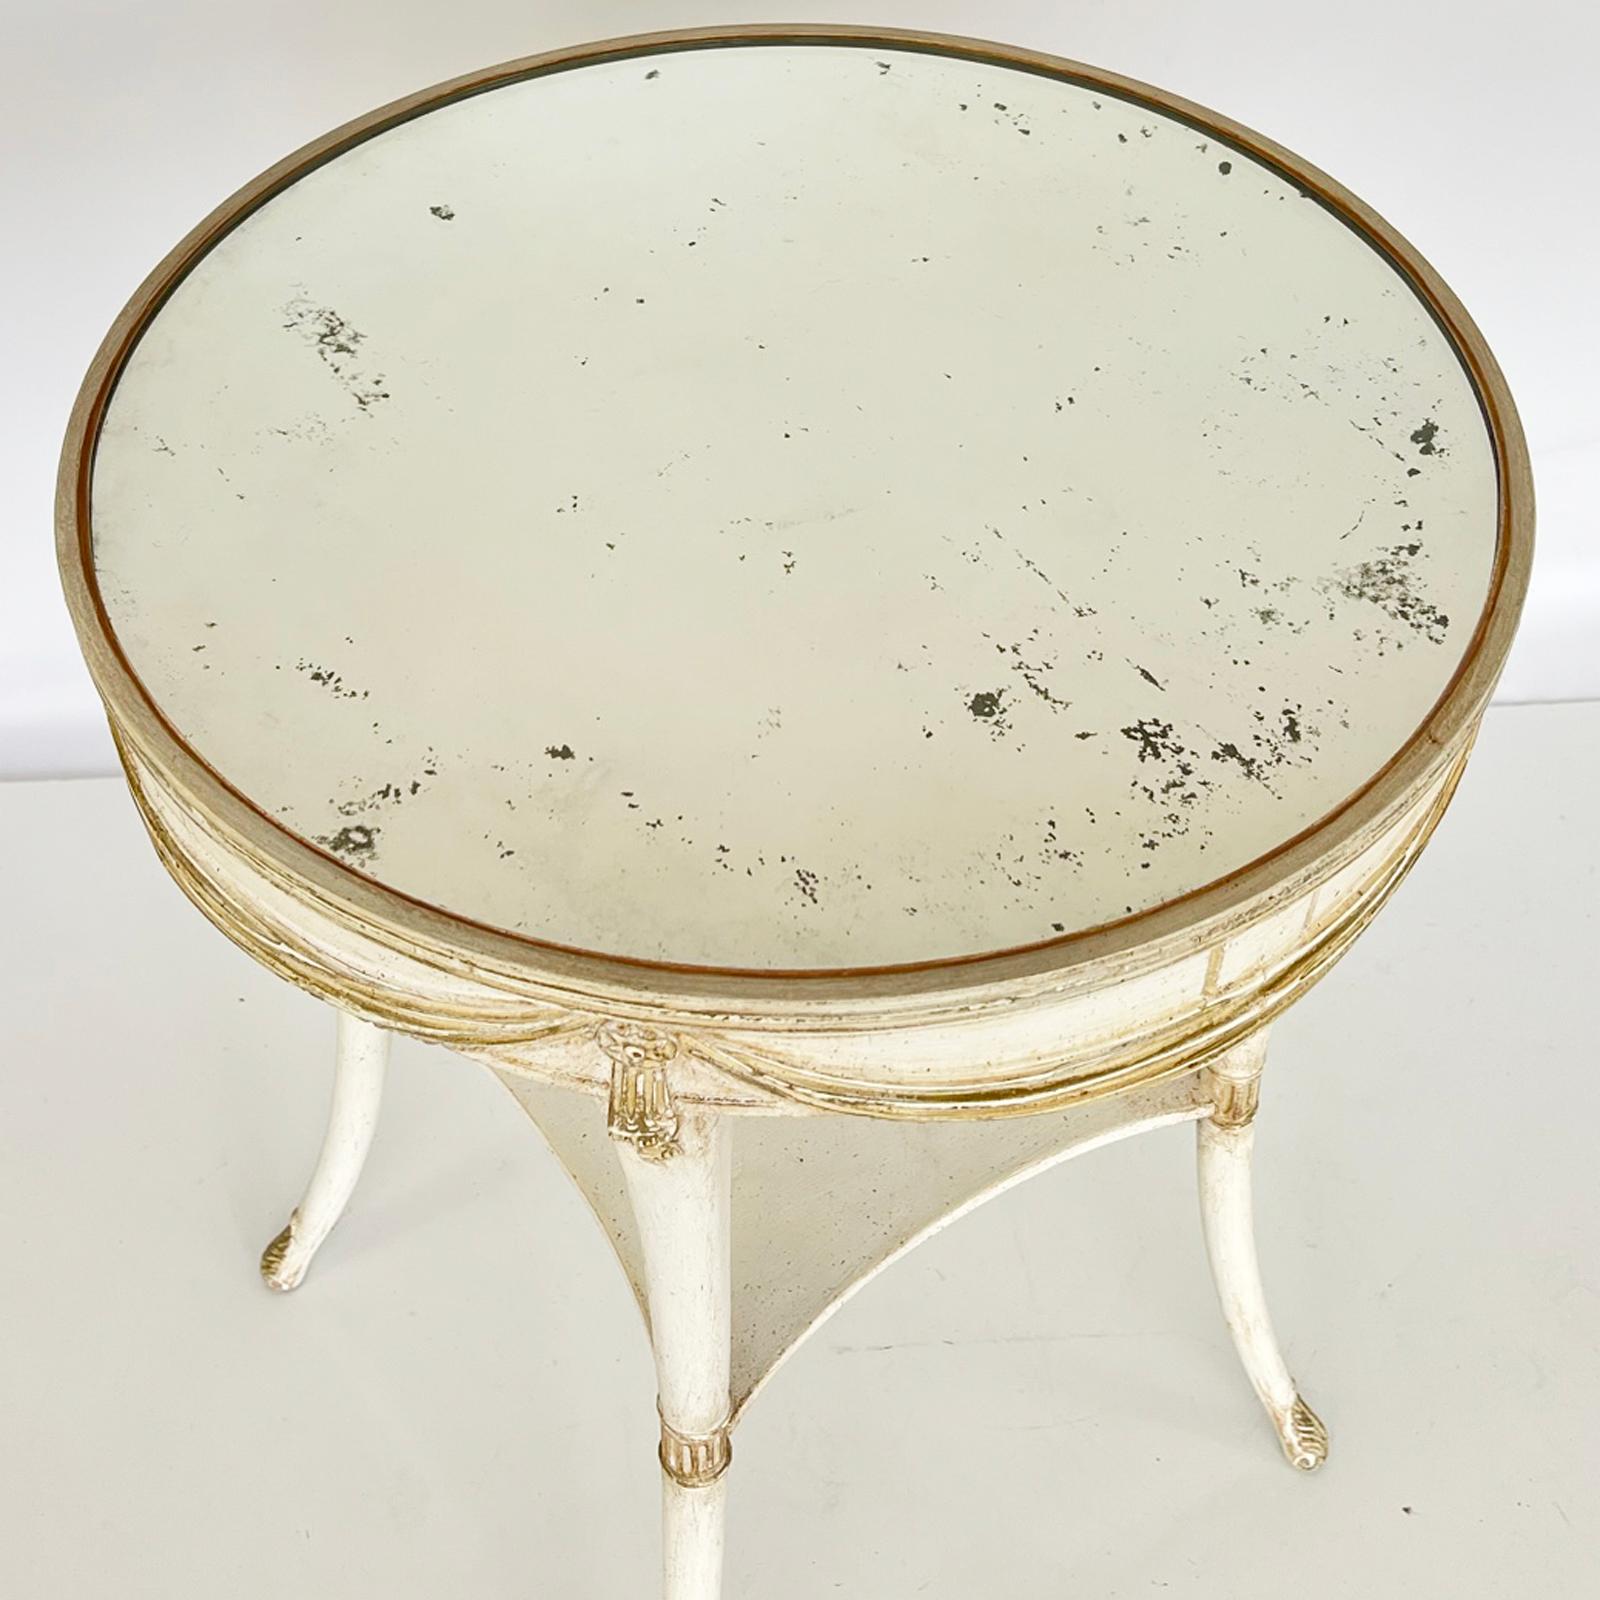 Swag-carved, Painted, Round Occasional Table with Mirrored Top by Grosfeld House In Good Condition For Sale In West Palm Beach, FL